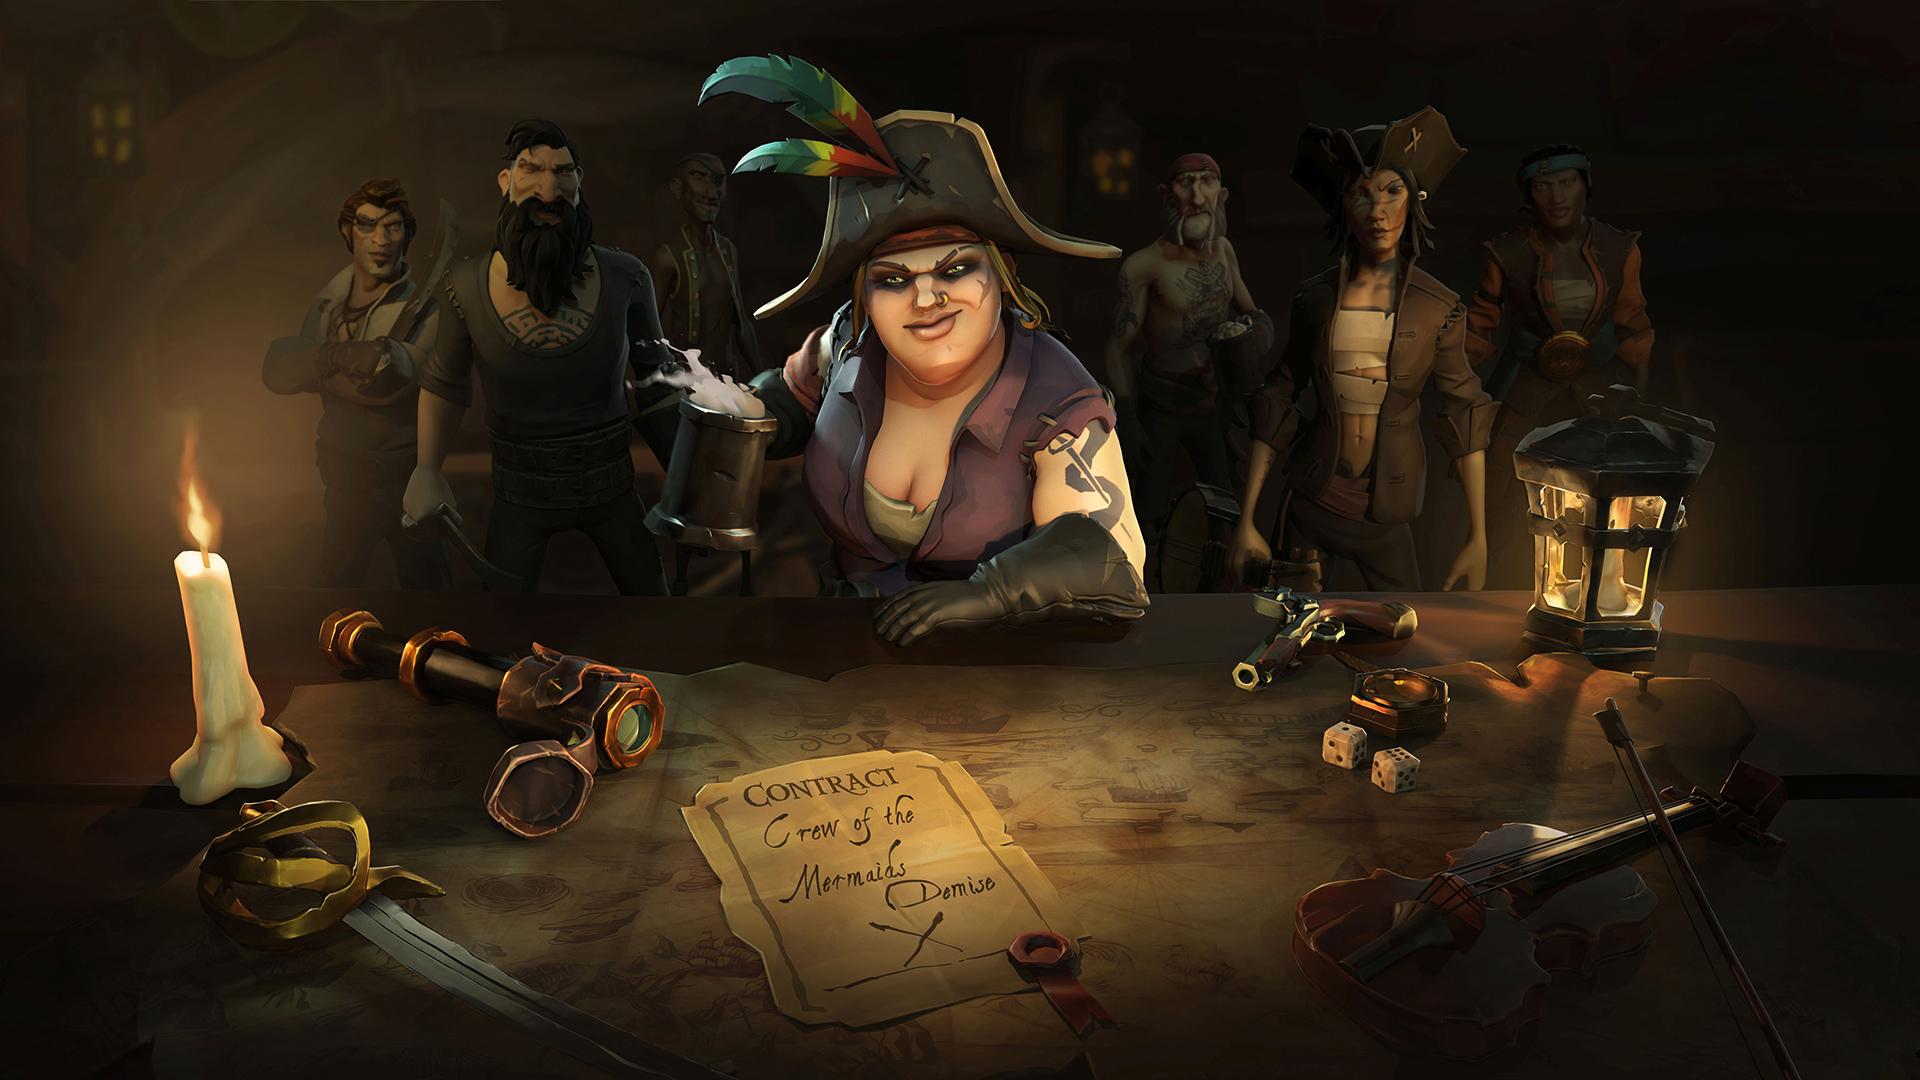 Pirate queen's offer. Wallpaper from Sea of Thieves